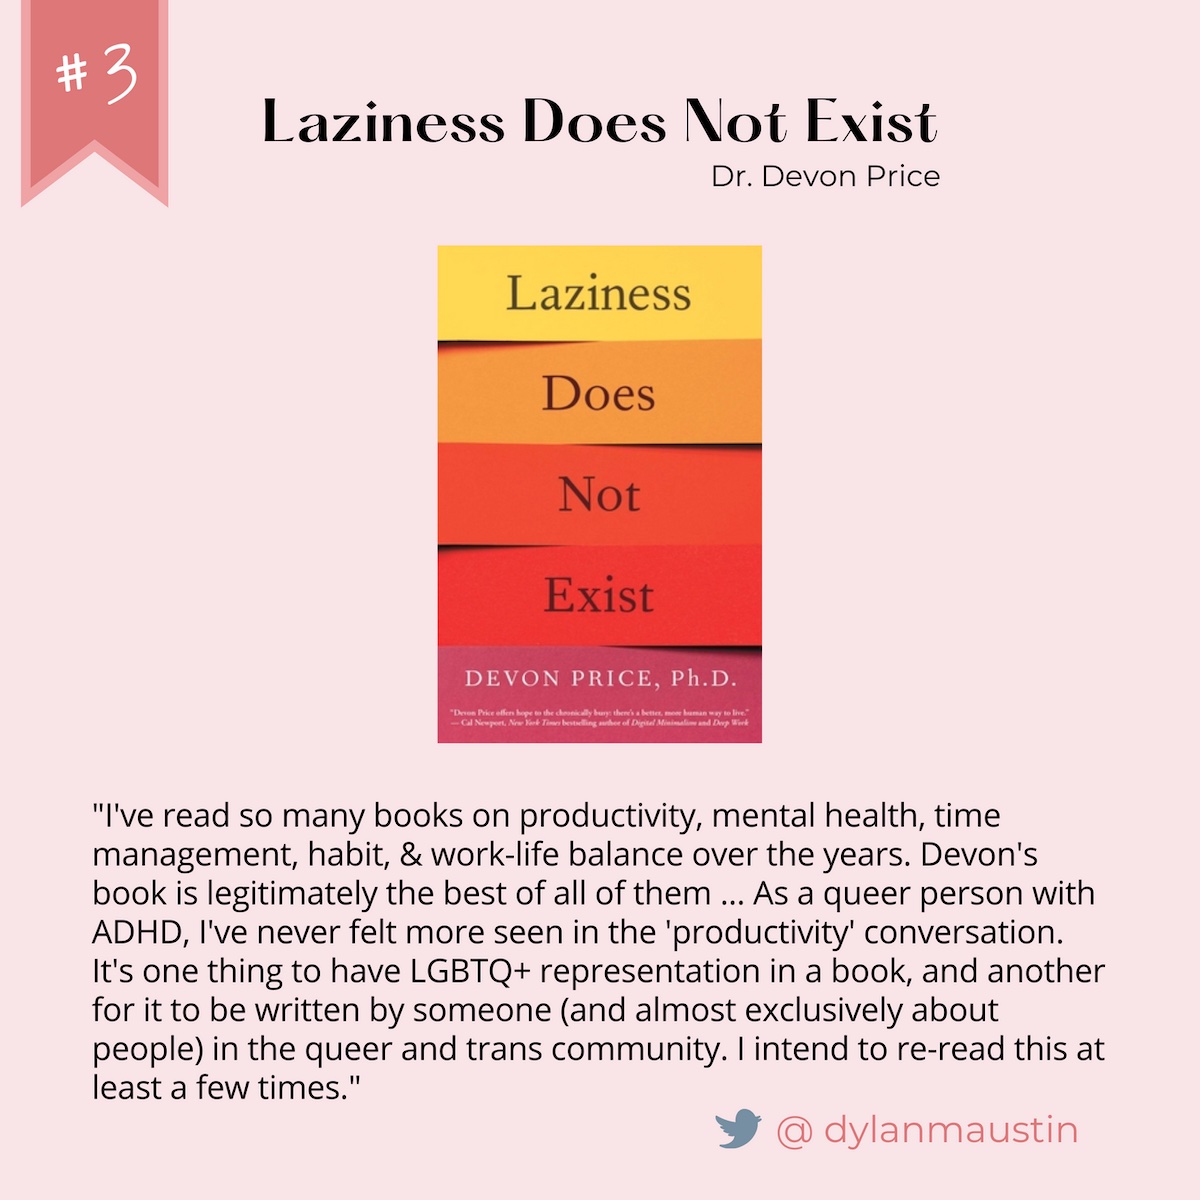 Number 3: Laziness Does Not Exist. Written by Dr. Devon Price. Quote from @dylanmaustin on Twitter: "I've read so many books on productivity, mental health, time management, habit, & work-life balance over the years. Devon's book is legitimately the best of all of them ... As a queer person with ADHD, I've never felt more seen in the 'productivity' conversation. It's one thing to have LGBTQ+ representation in a book, and another for it to be written by someone (and almost exclusively about people) in the queer and trans community. I intend to re-read this at least a few times."